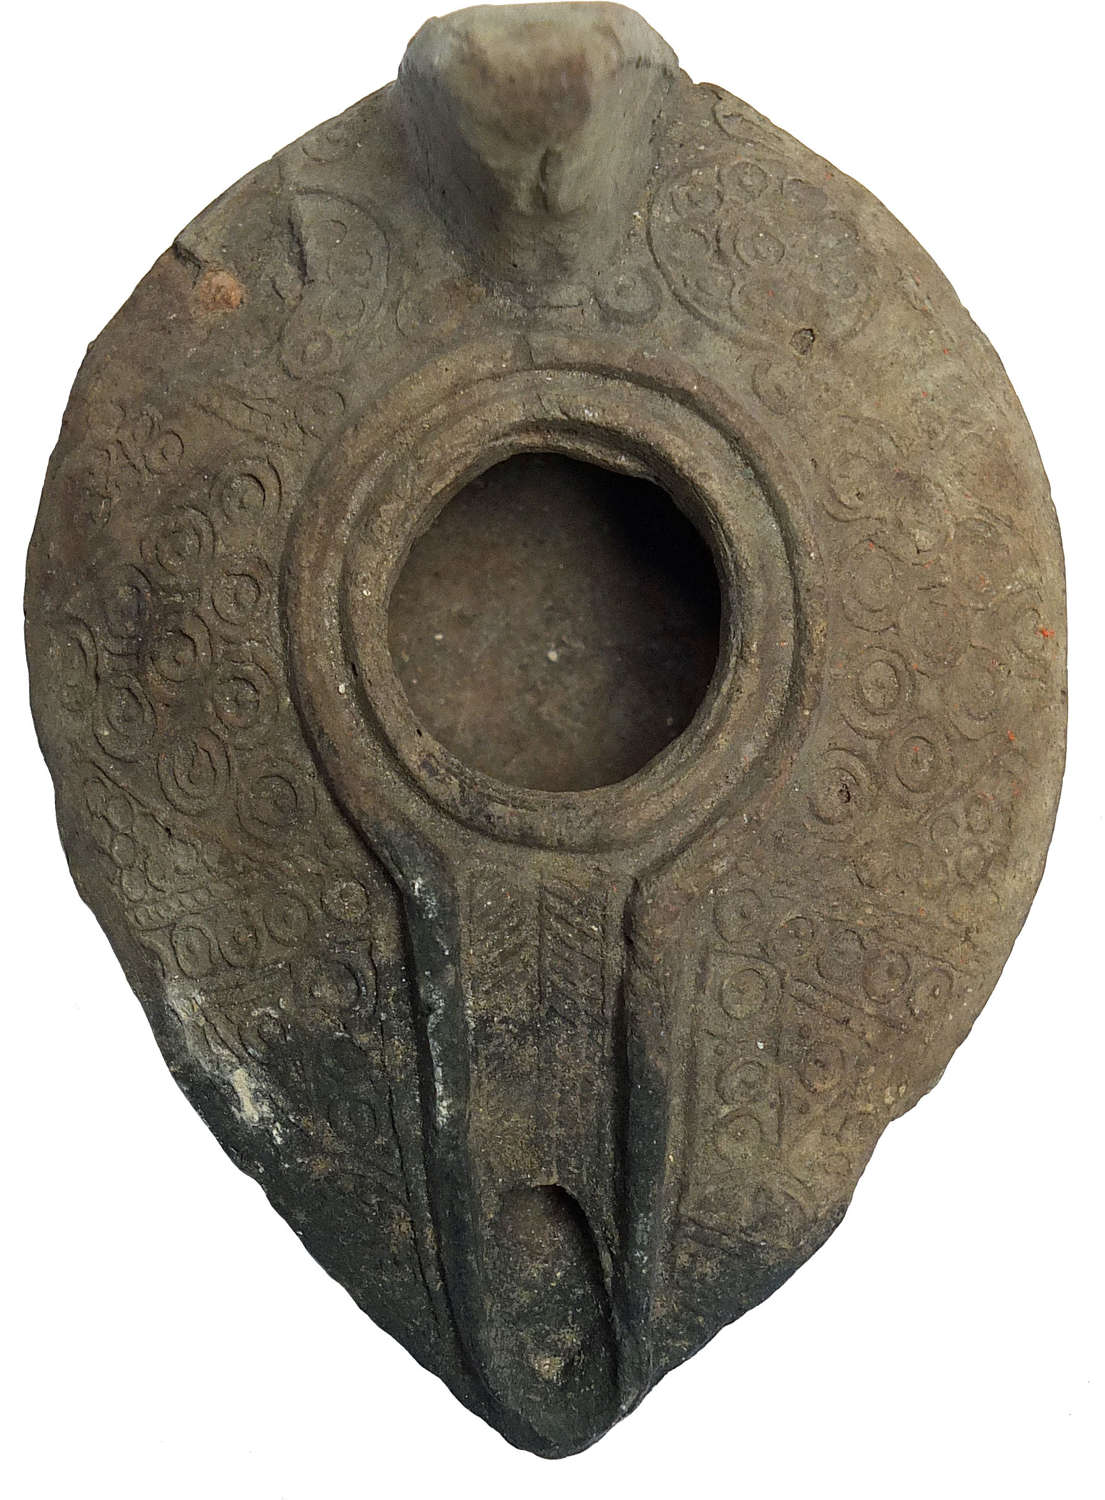 A Syro-Palestinian terracotta oil lamp, c. 6th-7th Century A.D.